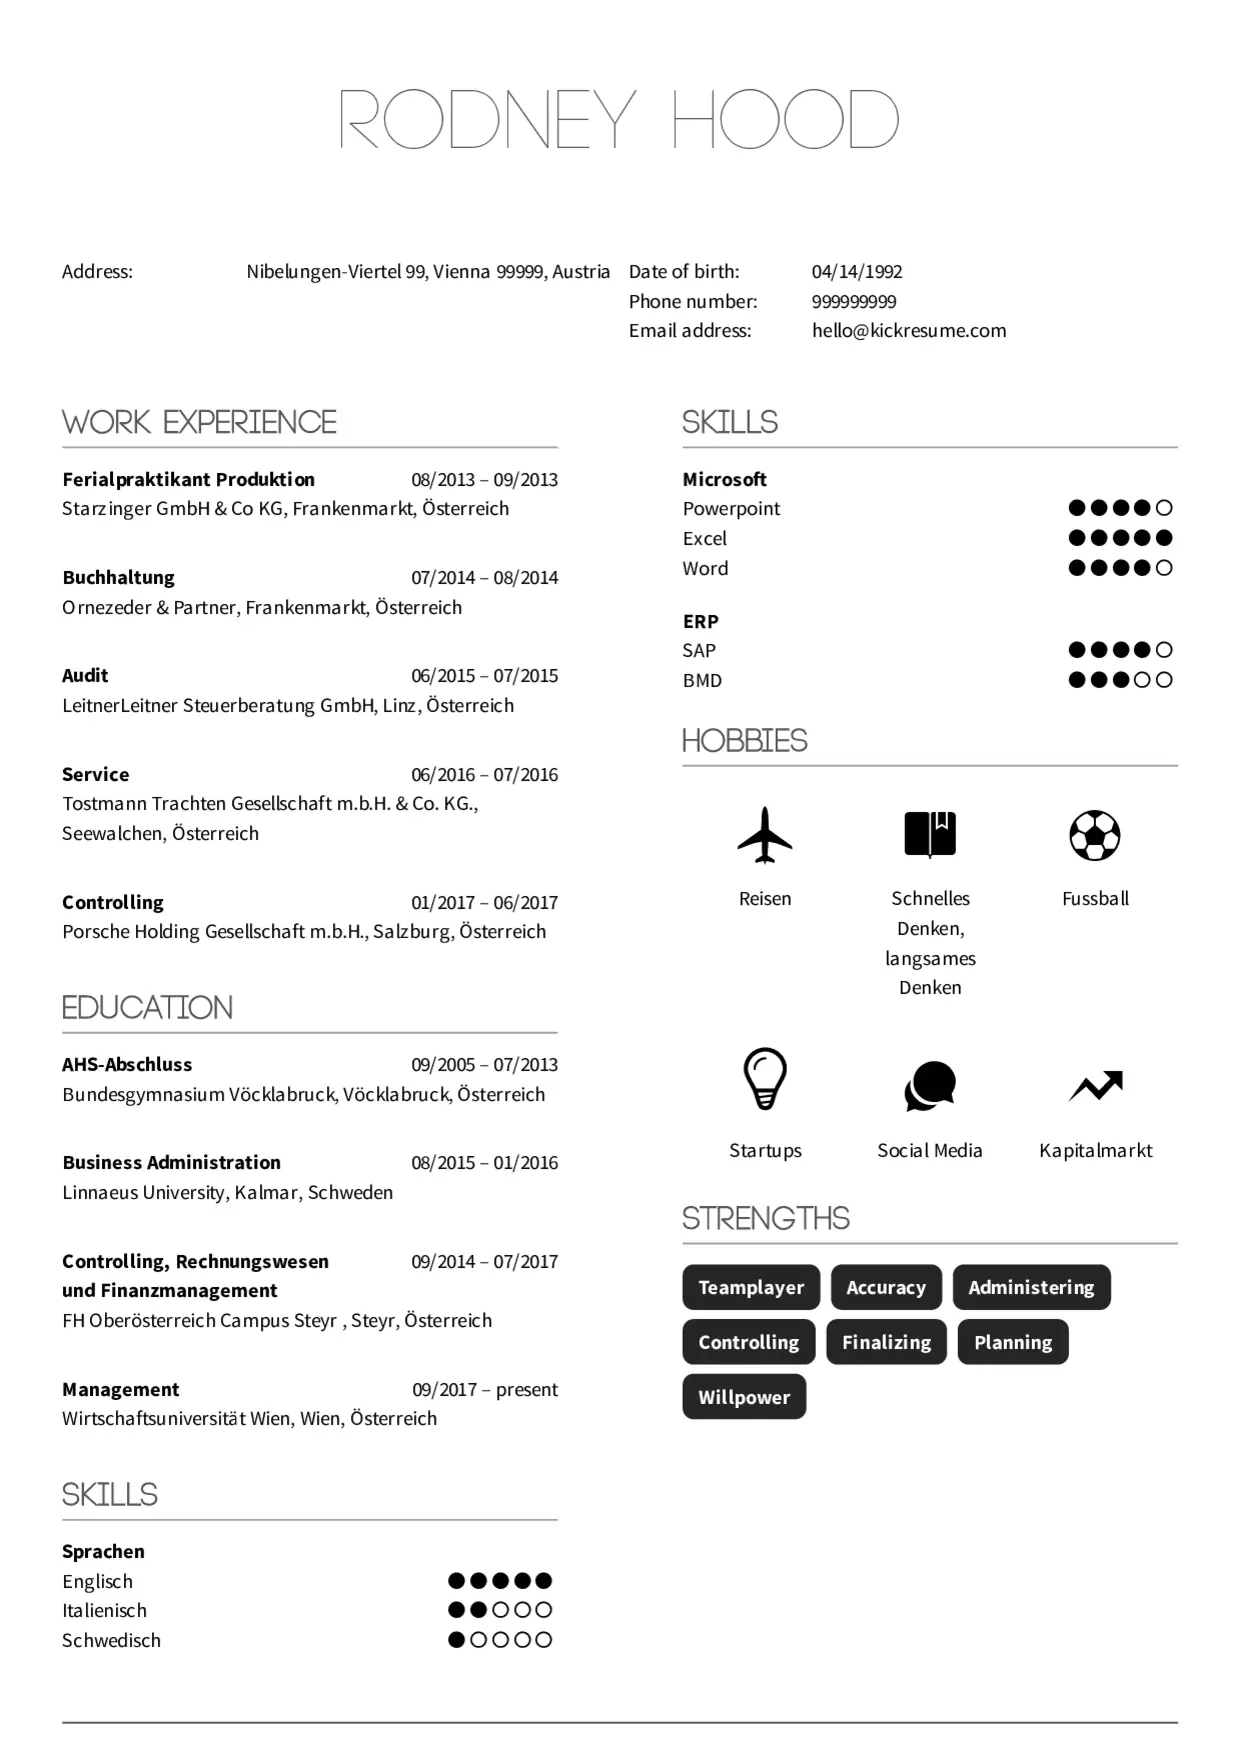 Porsche Holding HR manager Resume example